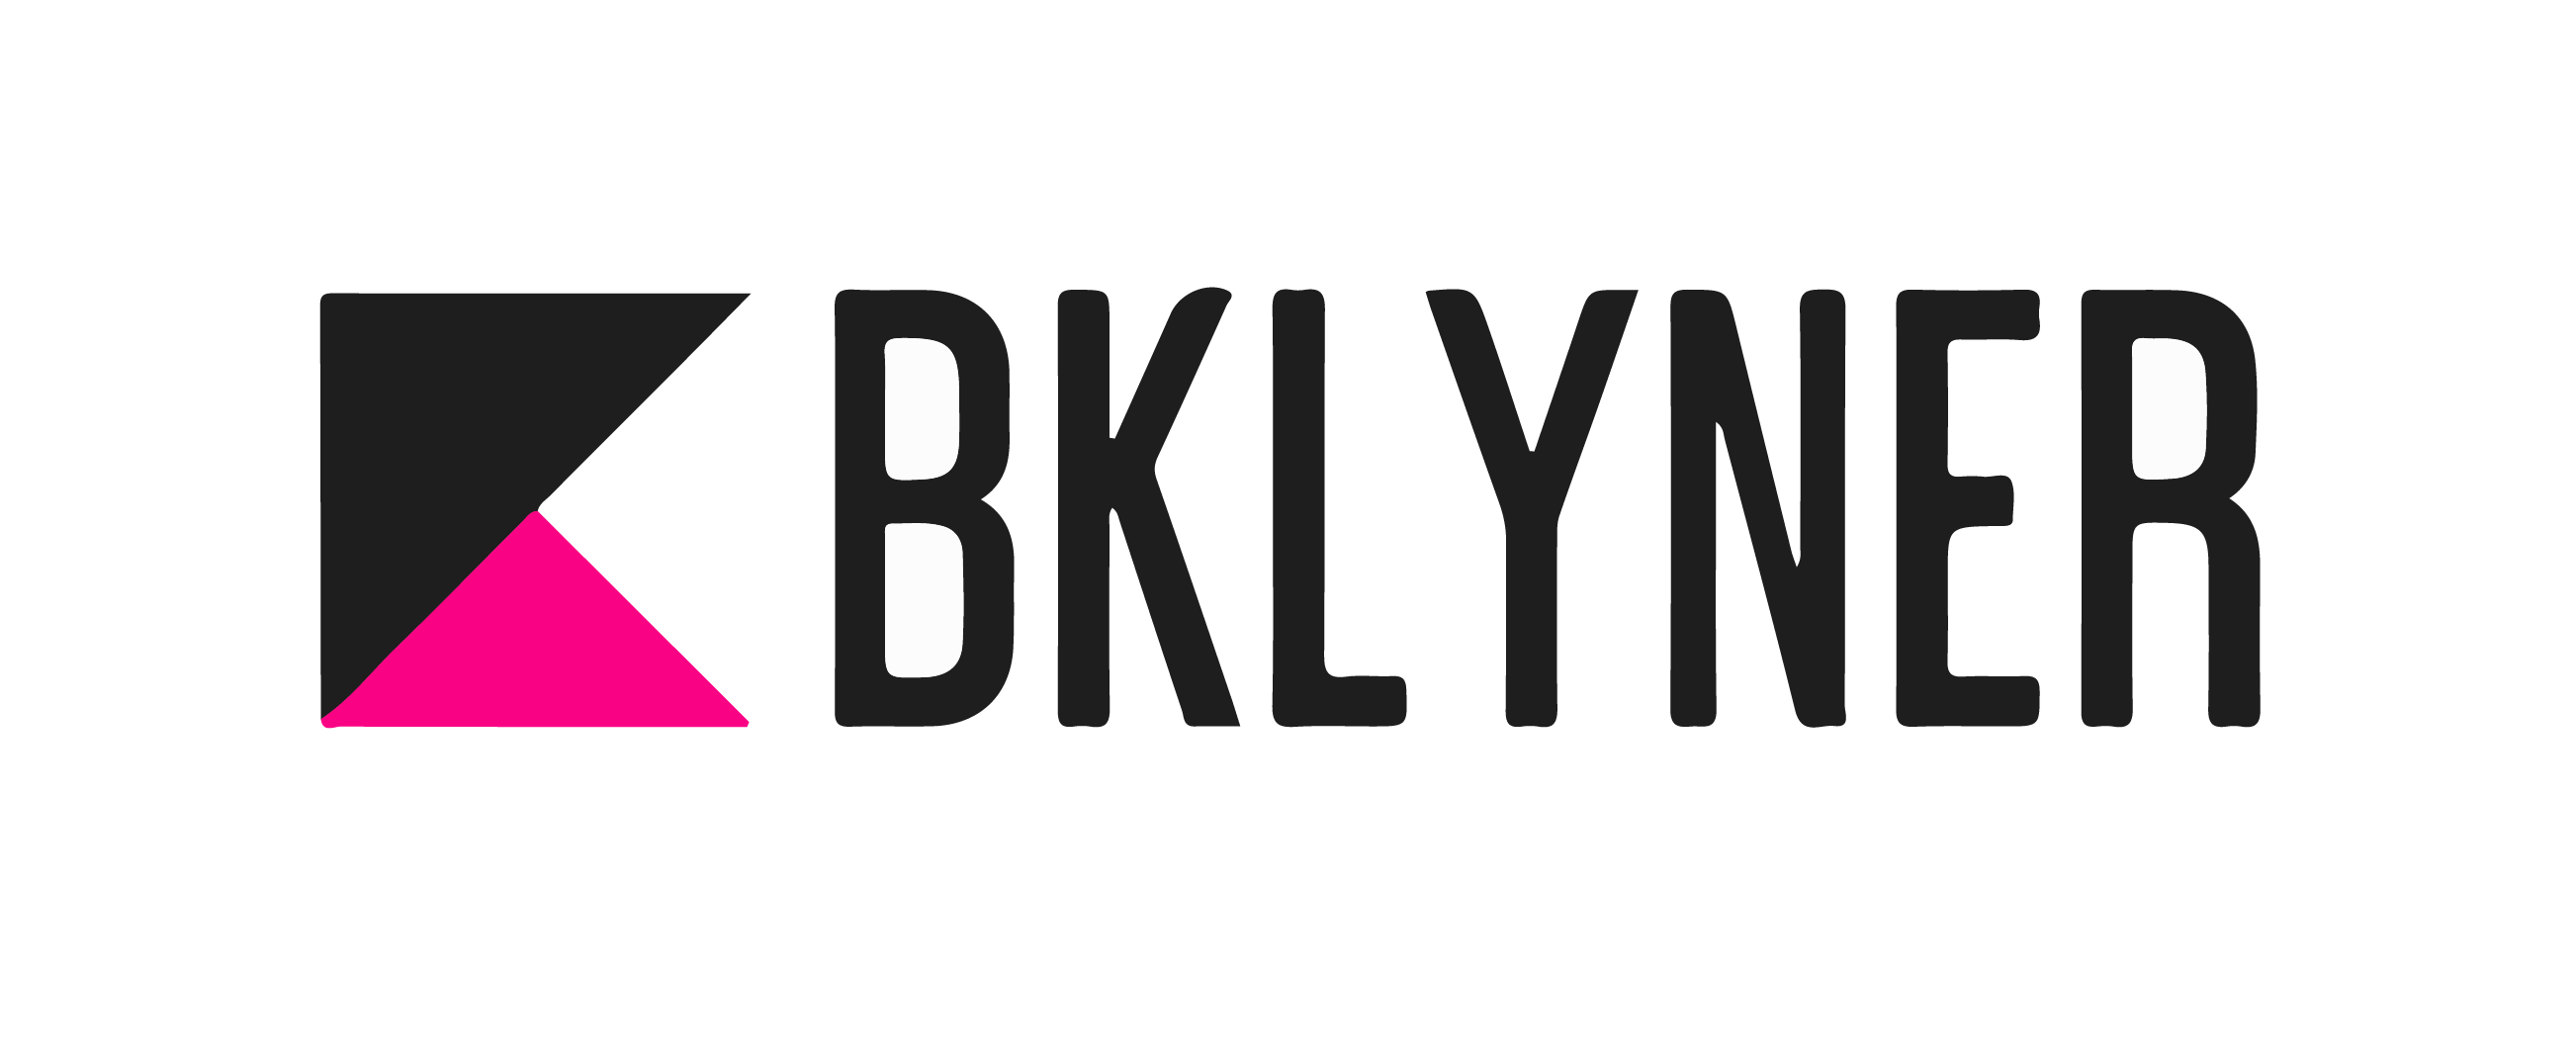 https://intersectionatthejunction.com/content/4-about/1-press/bklyner-logo-01.png